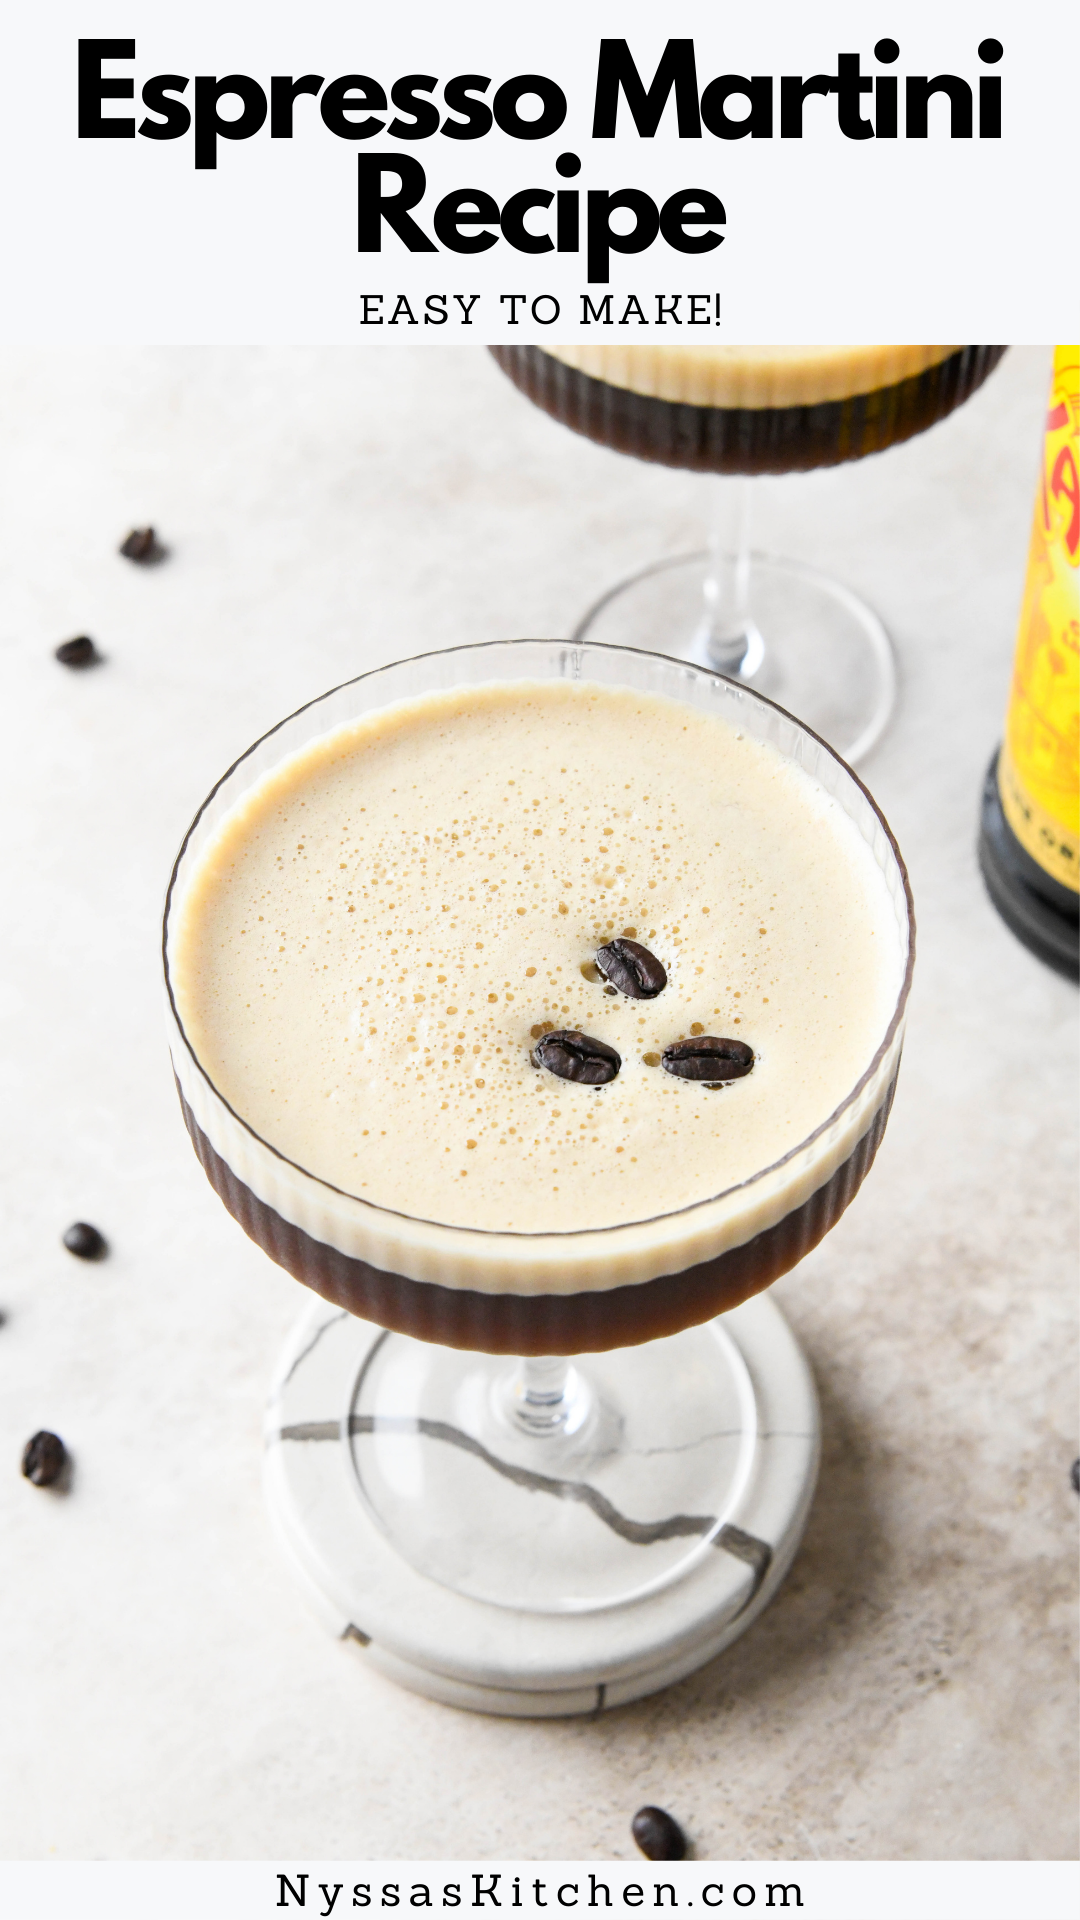 Let's make espresso martinis at home! This easy espresso martini recipe is a bold and sweet cocktail with a foamy top that is a total crowd pleaser! The perfect after dinner drink made with a few simple ingredients and topped with coffee beans. Simple, easy, and delicious!